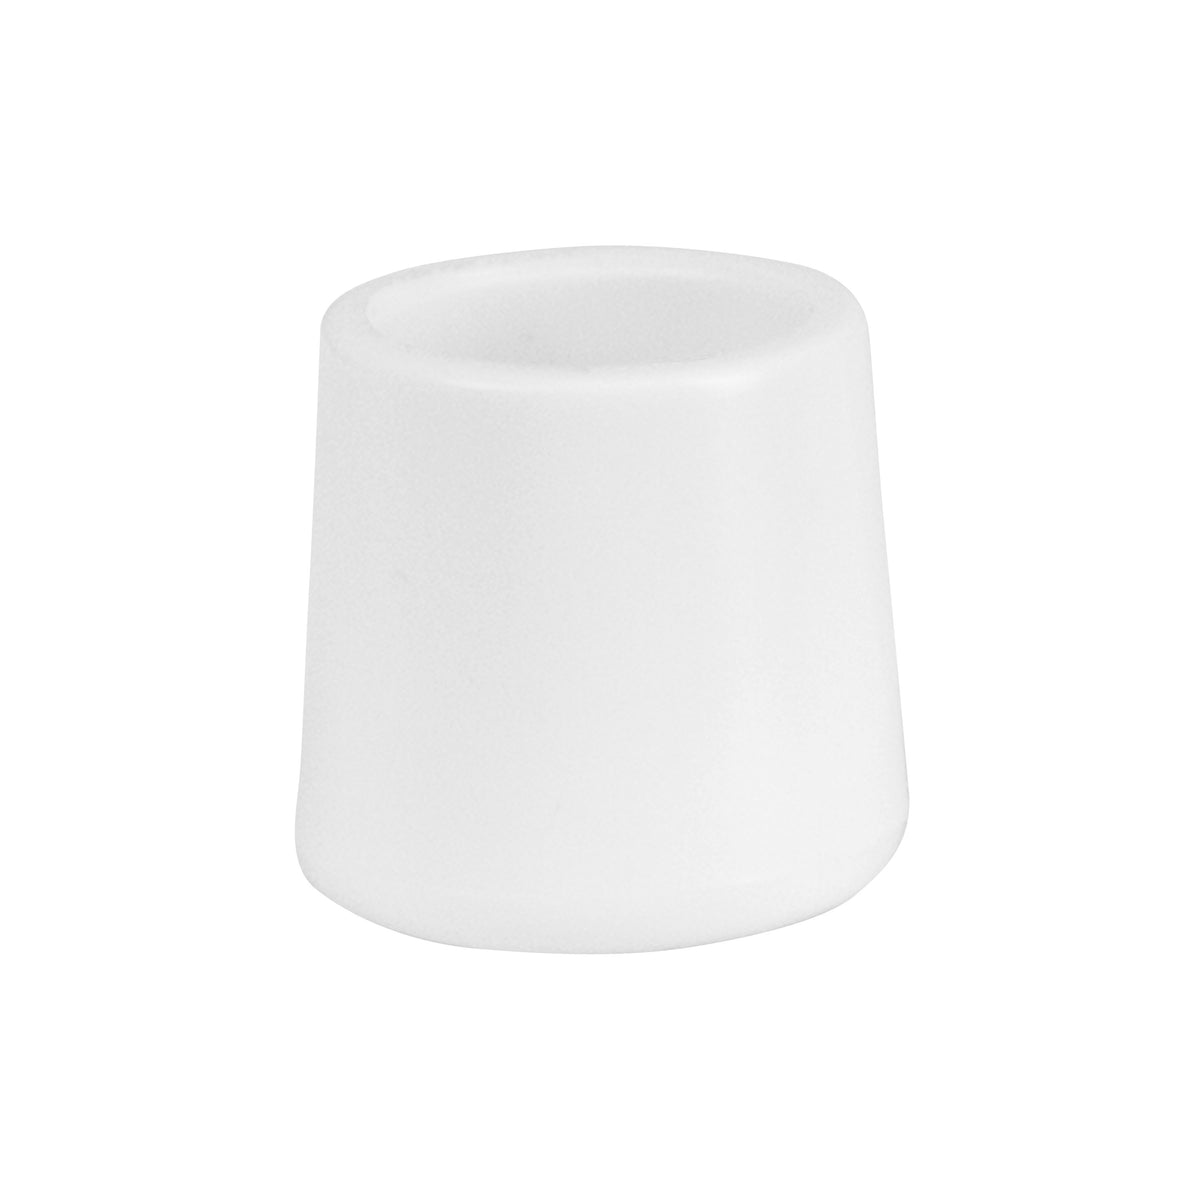 White |#| White Replacement Foot Cap for Plastic Folding Chairs